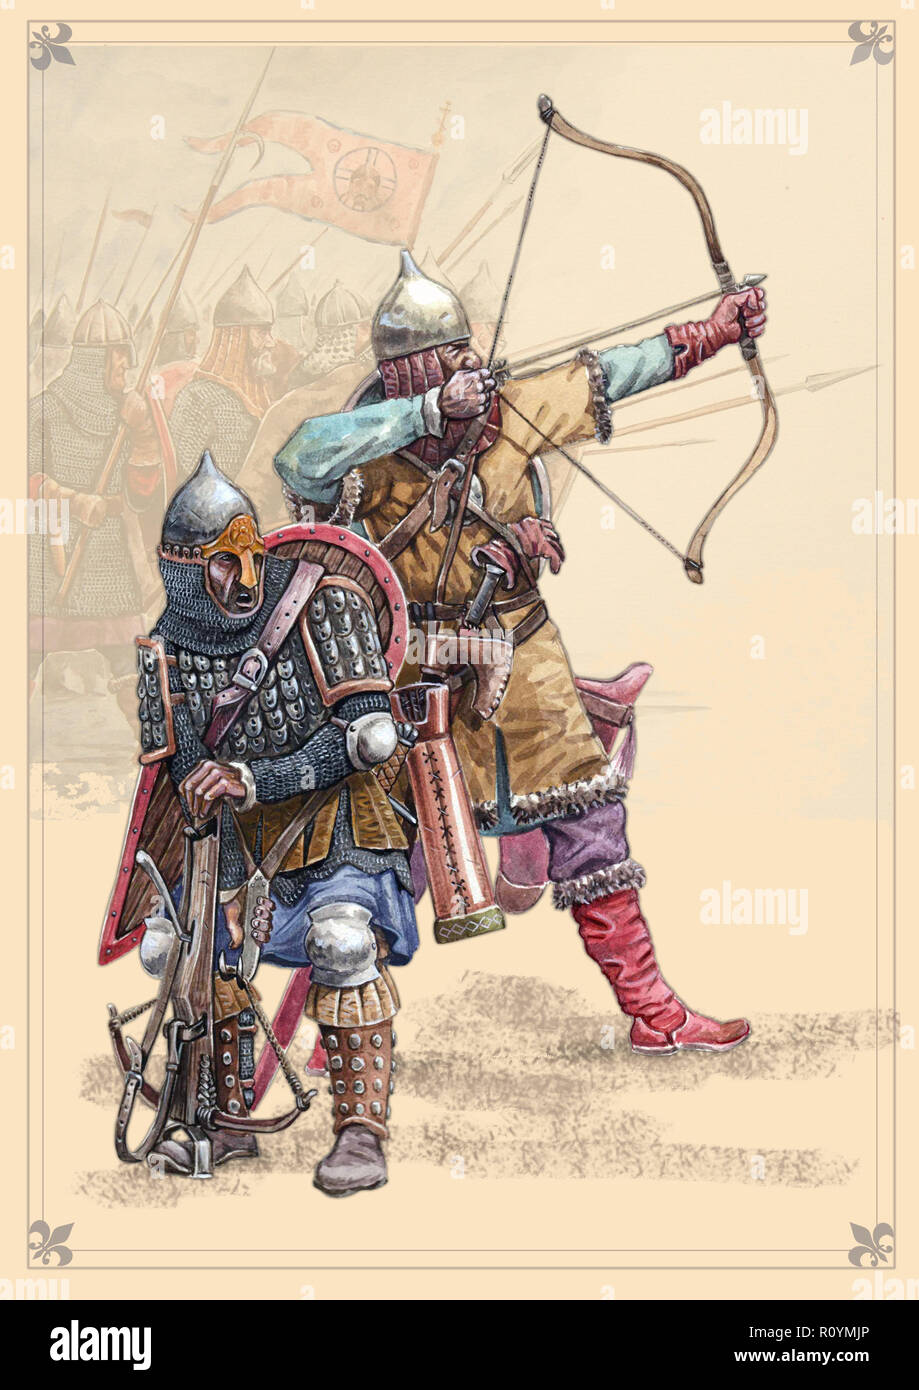 Medieval knights. Russian archer and crossbowman, Peipus lake battle. Historical illustration. Stock Photo